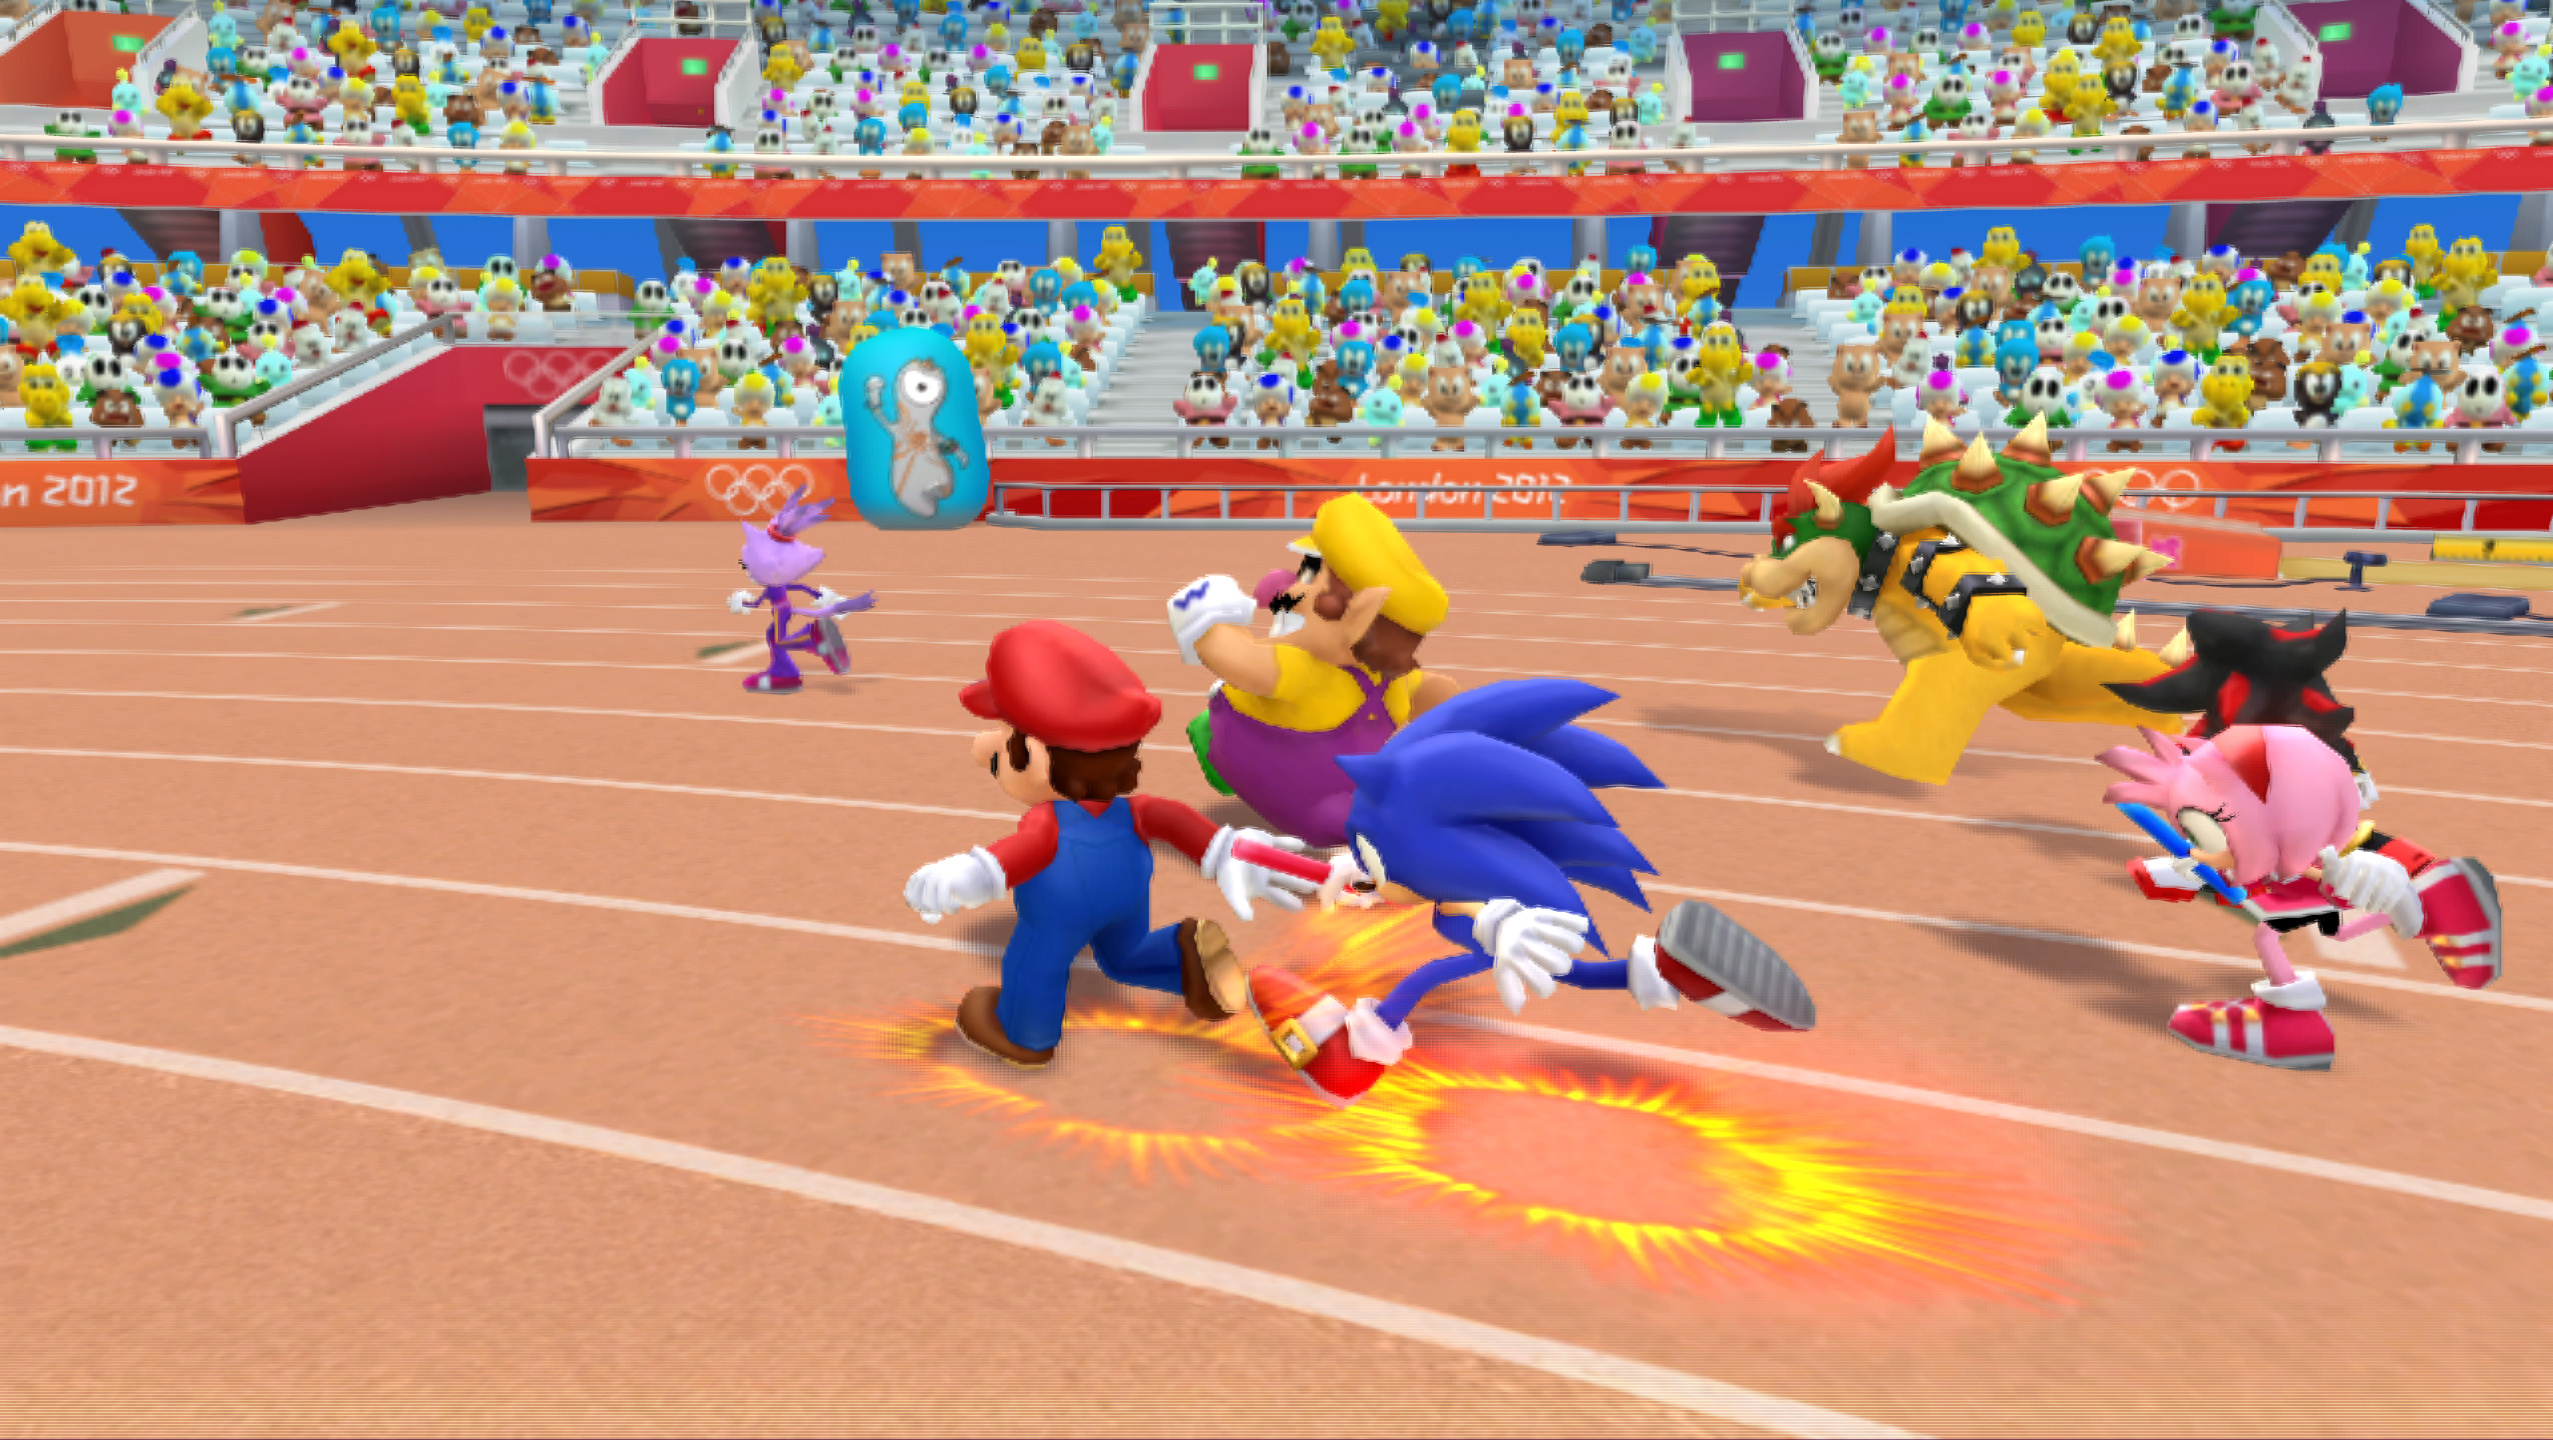 Игры game game 2012. Mario & Sonic at the London 2012. Mario & Sonic at the London 2012 Olympic games. Mario & Sonic at the Olympic games. Mario & Sonic at the London 2012 Wii.